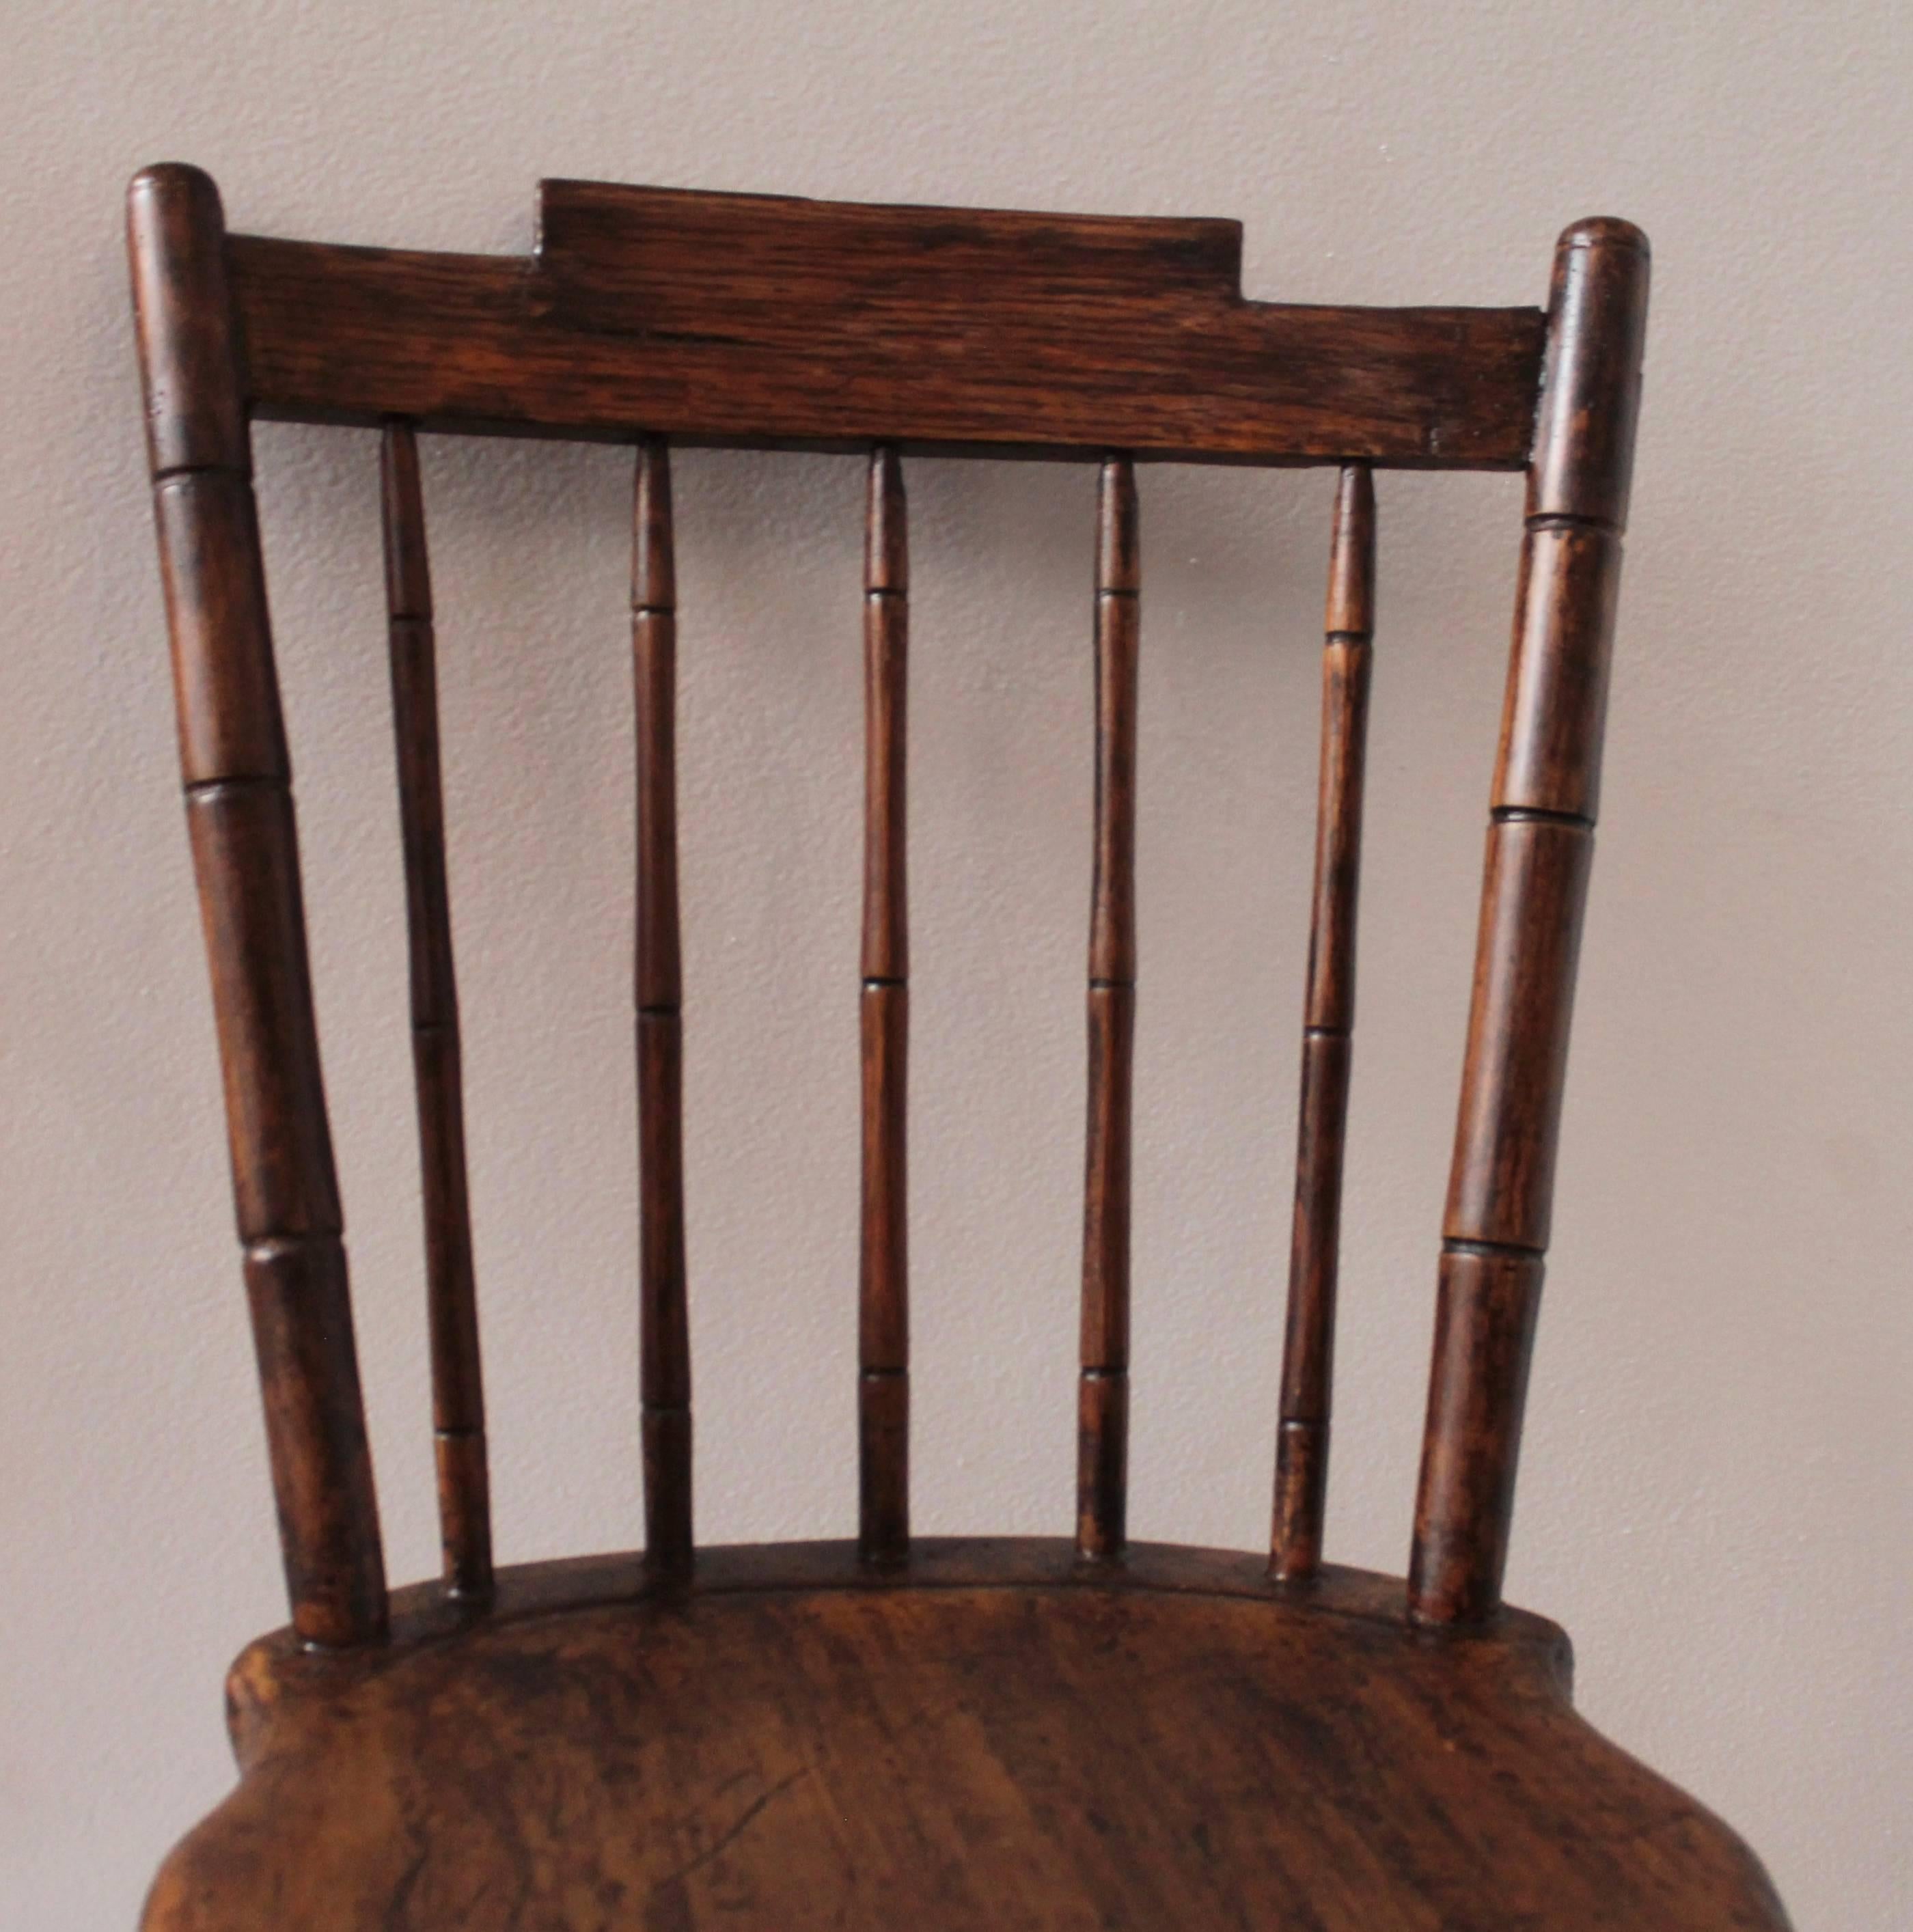 Early 19th century painted child's windsor chair in good condition. The chair has a second generation painted surface.